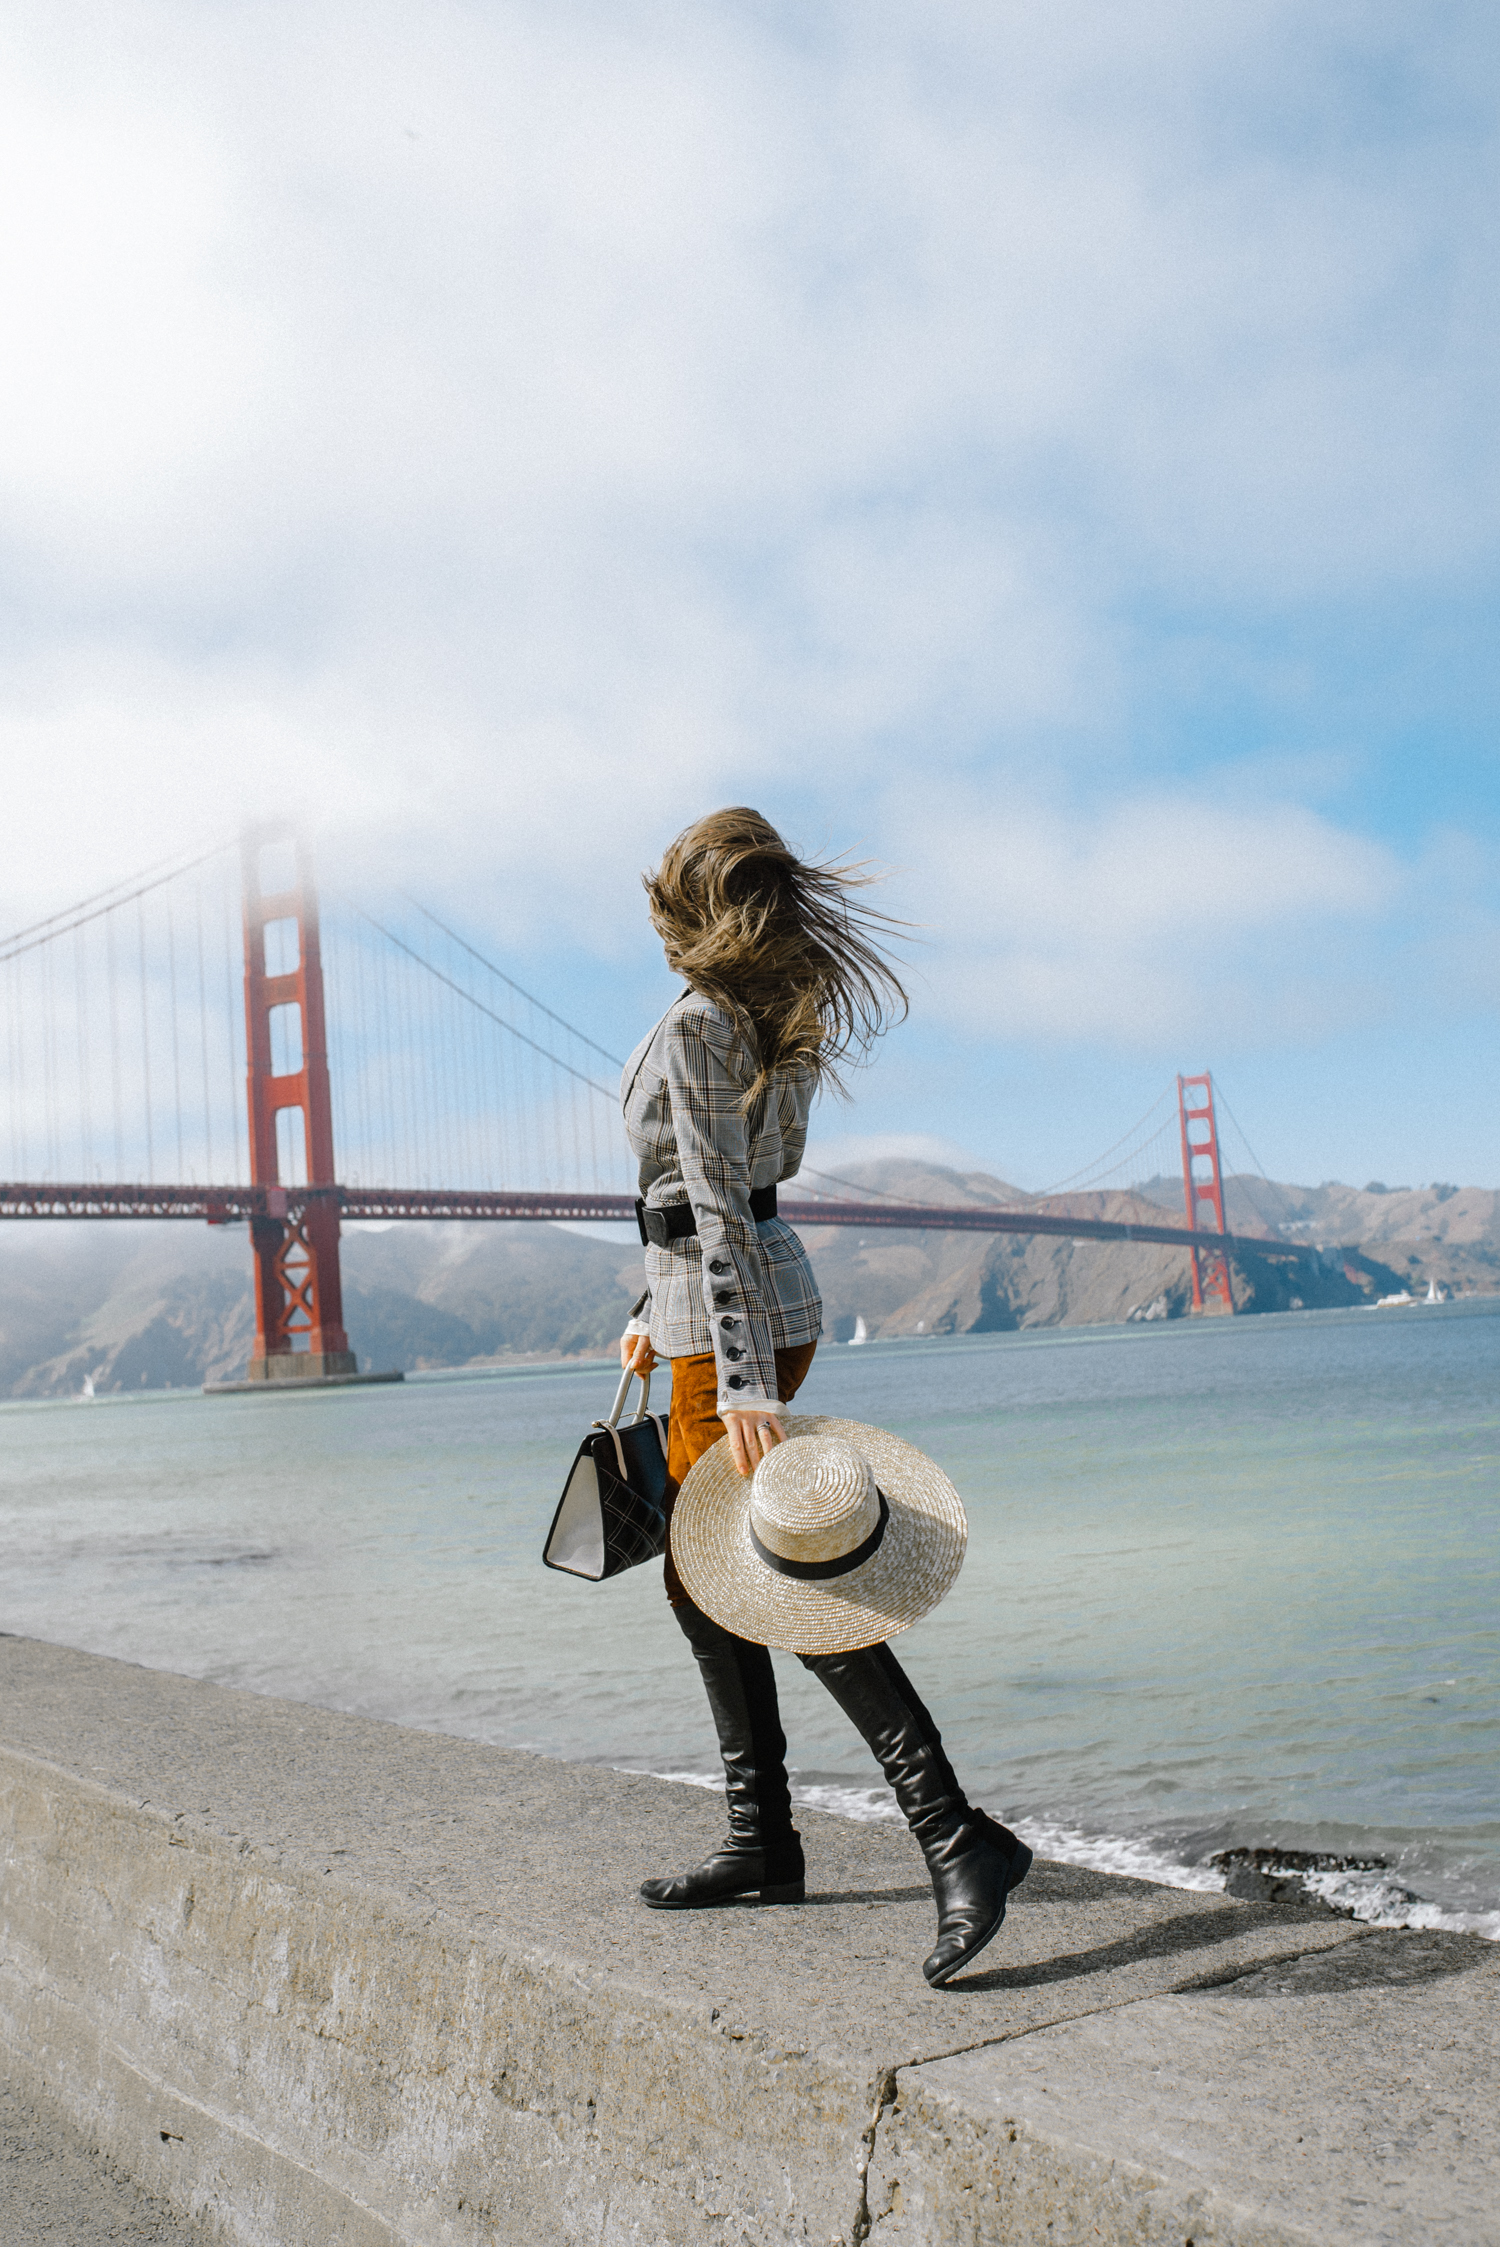 Alyssa Campanella of The A List blog travels to San Francisco with Alaska Airlines and Shopstyle wearing Veronica Beard plaid dickey jacket, Joseph suede pants, Lack of Color spencer wide brim hat, and Strathberry midi tote